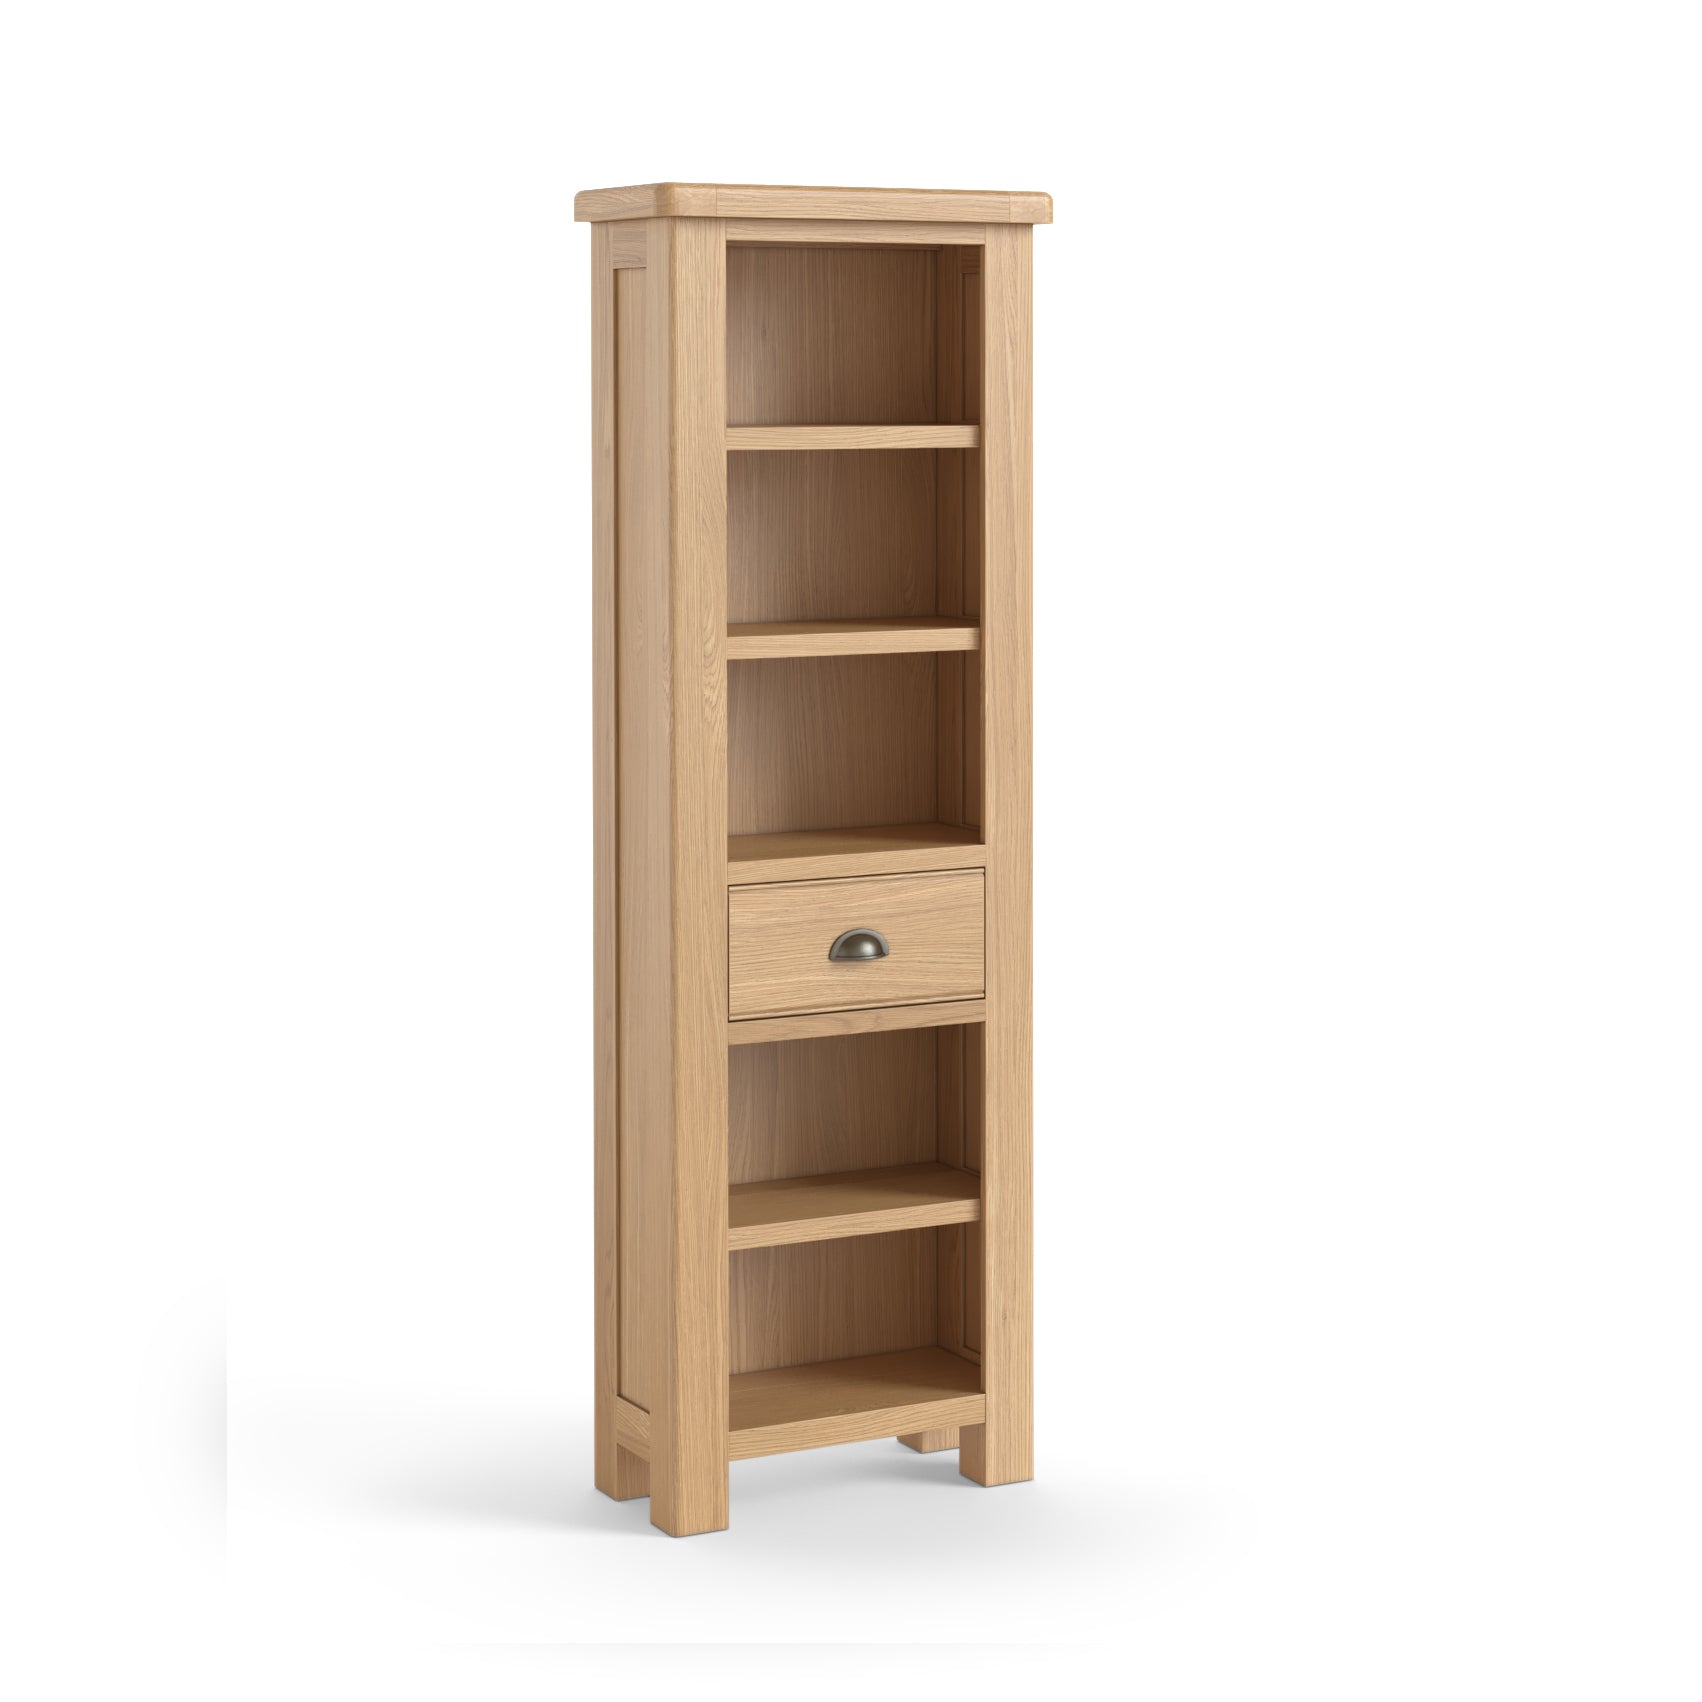 Provence Oak Slim Bookcase With Drawer.